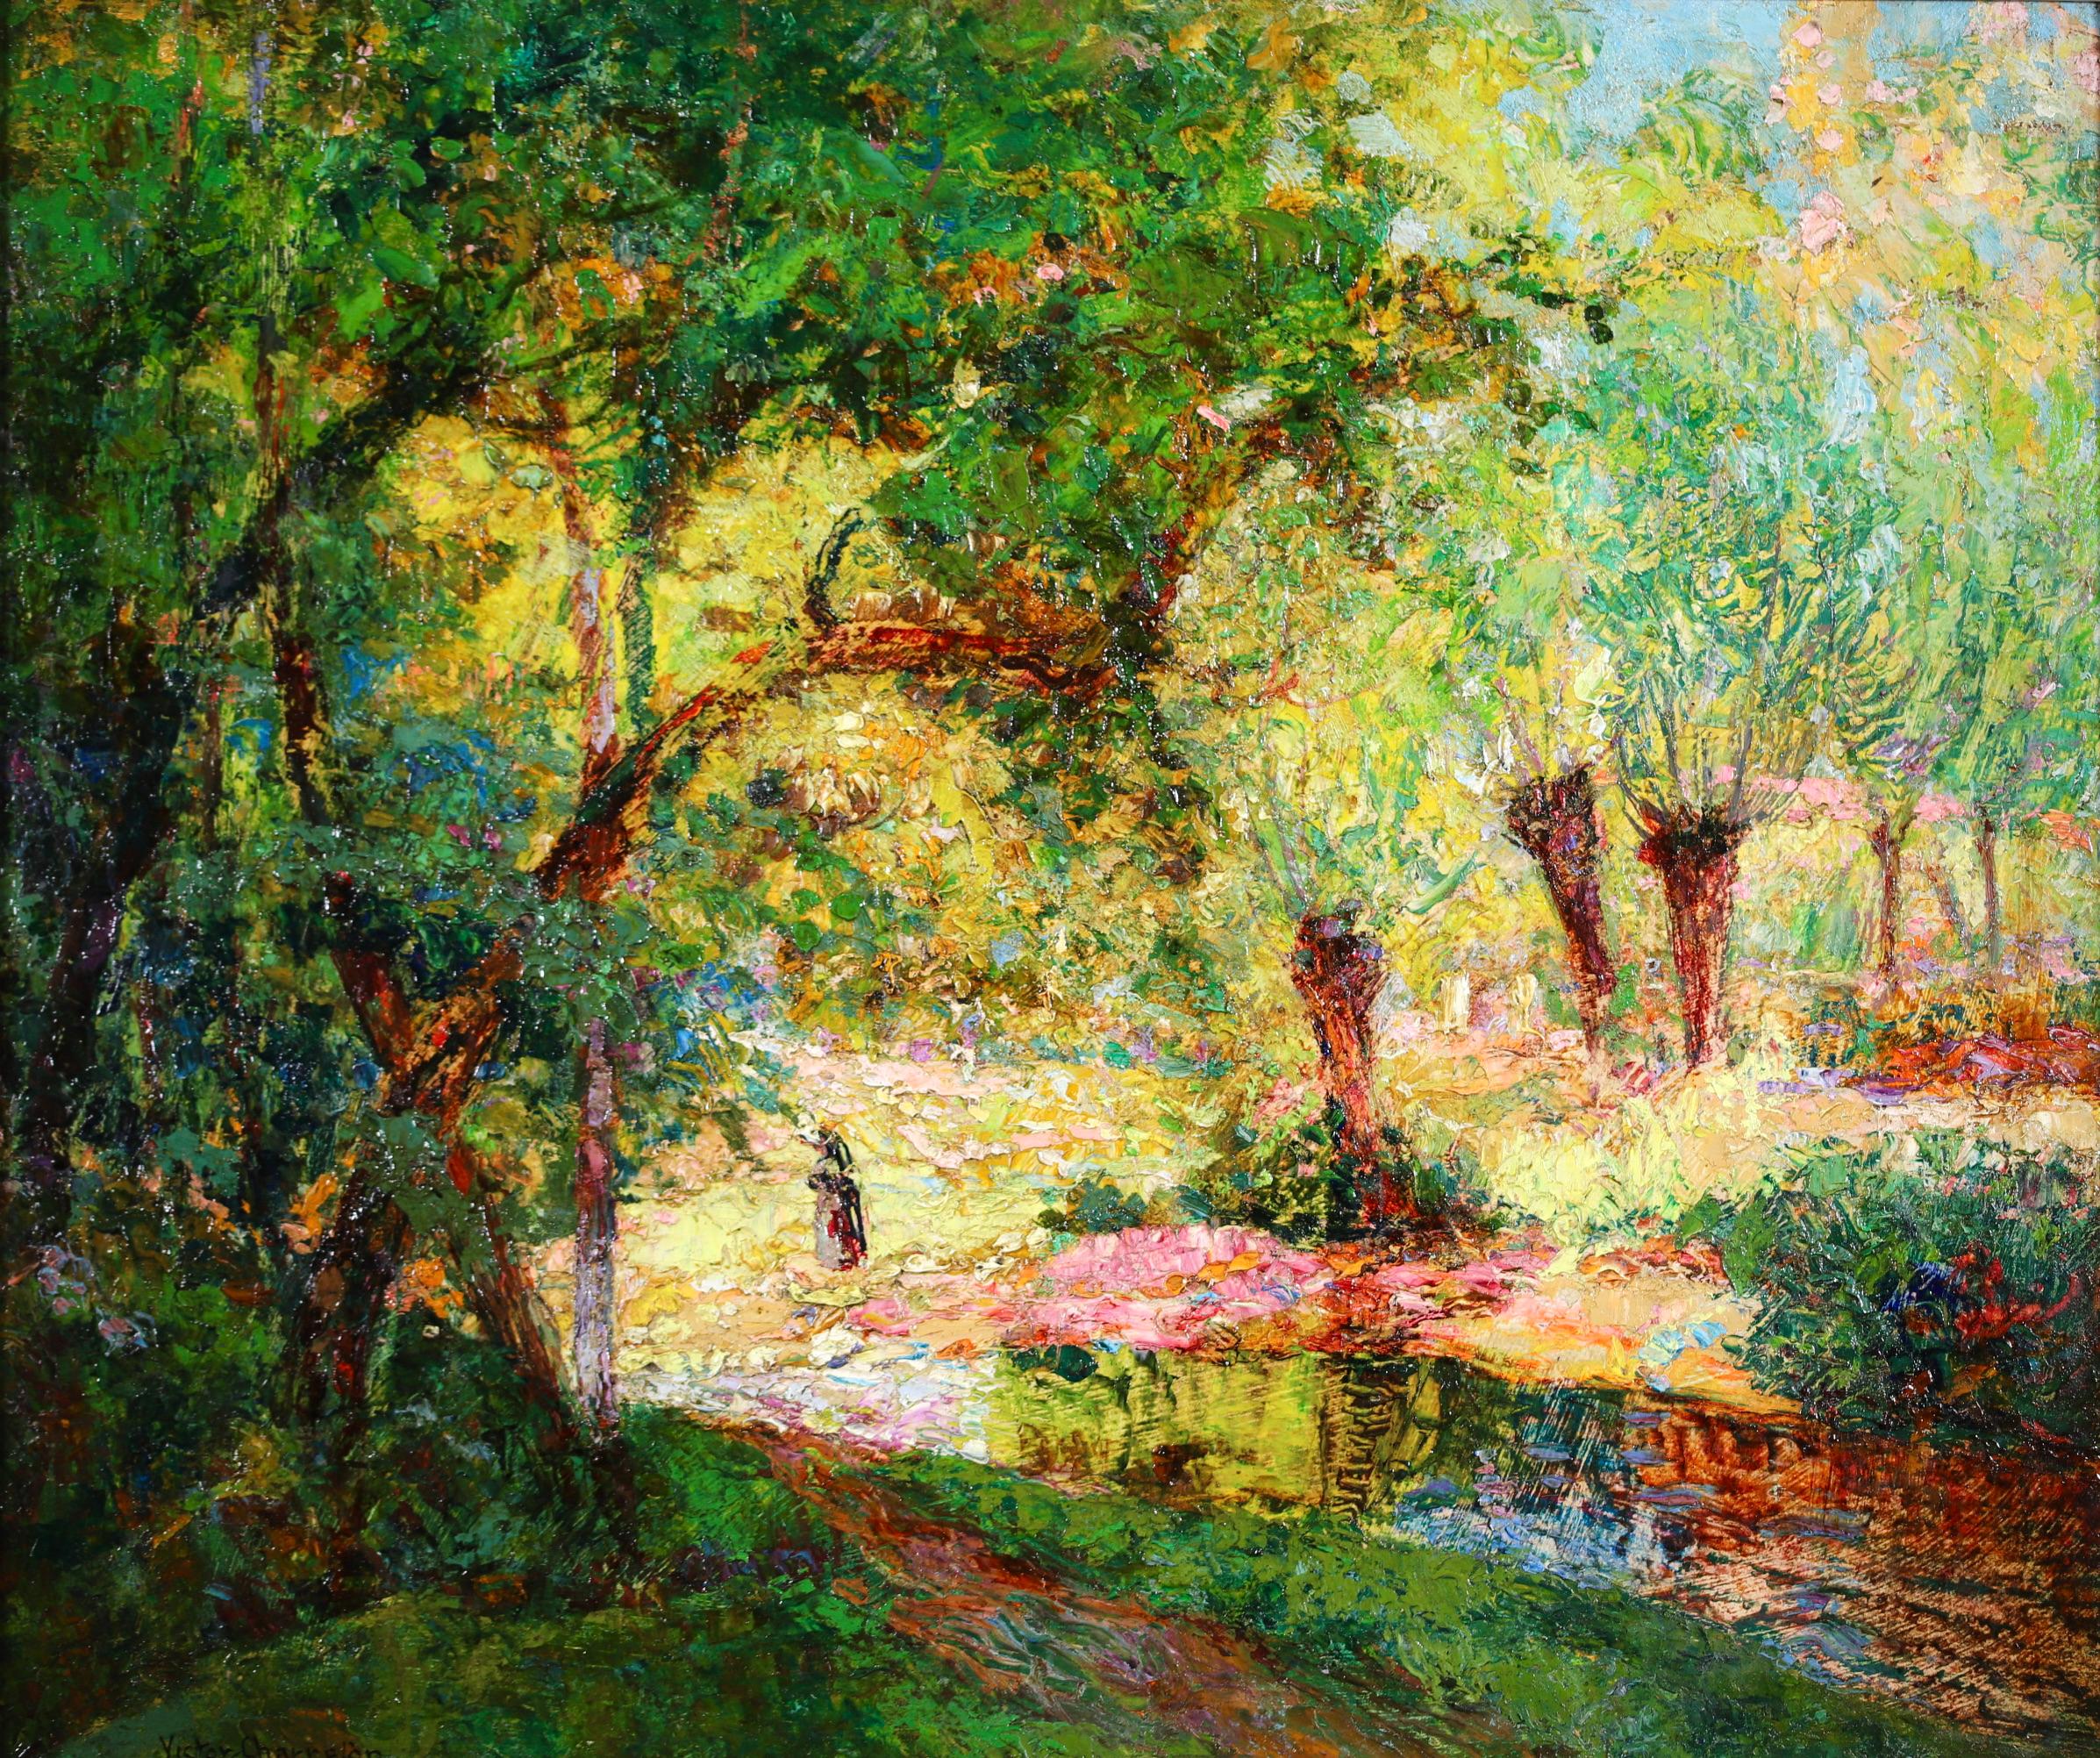 Signed figure in landscape oil on board circa 1910 by French Post-Impressionist painter Victor Charreton. The piece depicts a lone figure taking a walk beside a stream in a wooded area on a bright summer's day. The work is beautifully